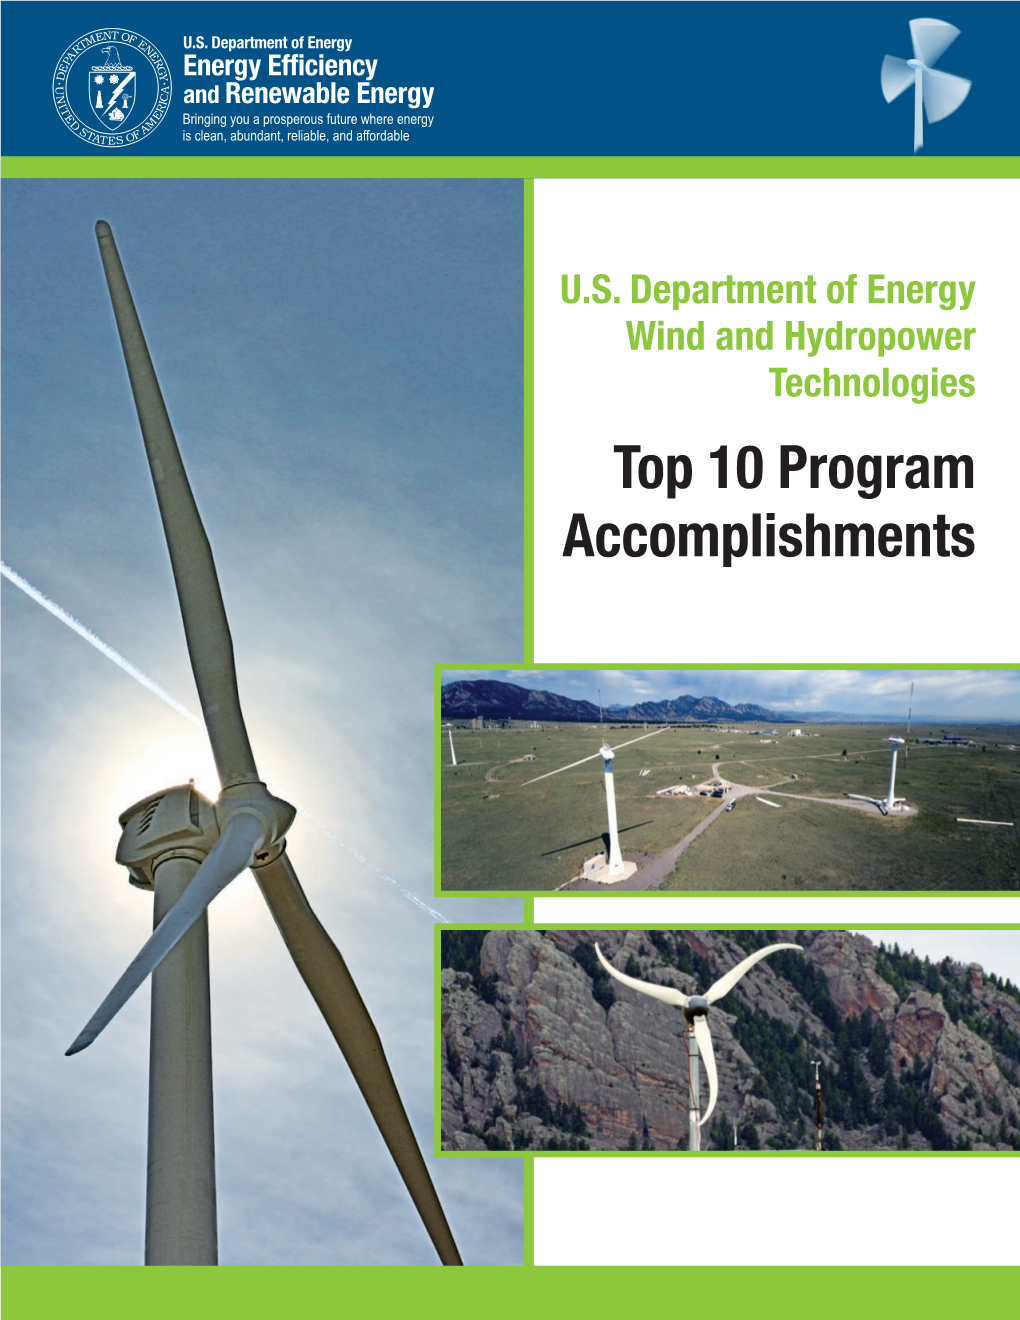 US Department of Energy Wind and Hydropower Technologies: Top 10 Program Accomplishments